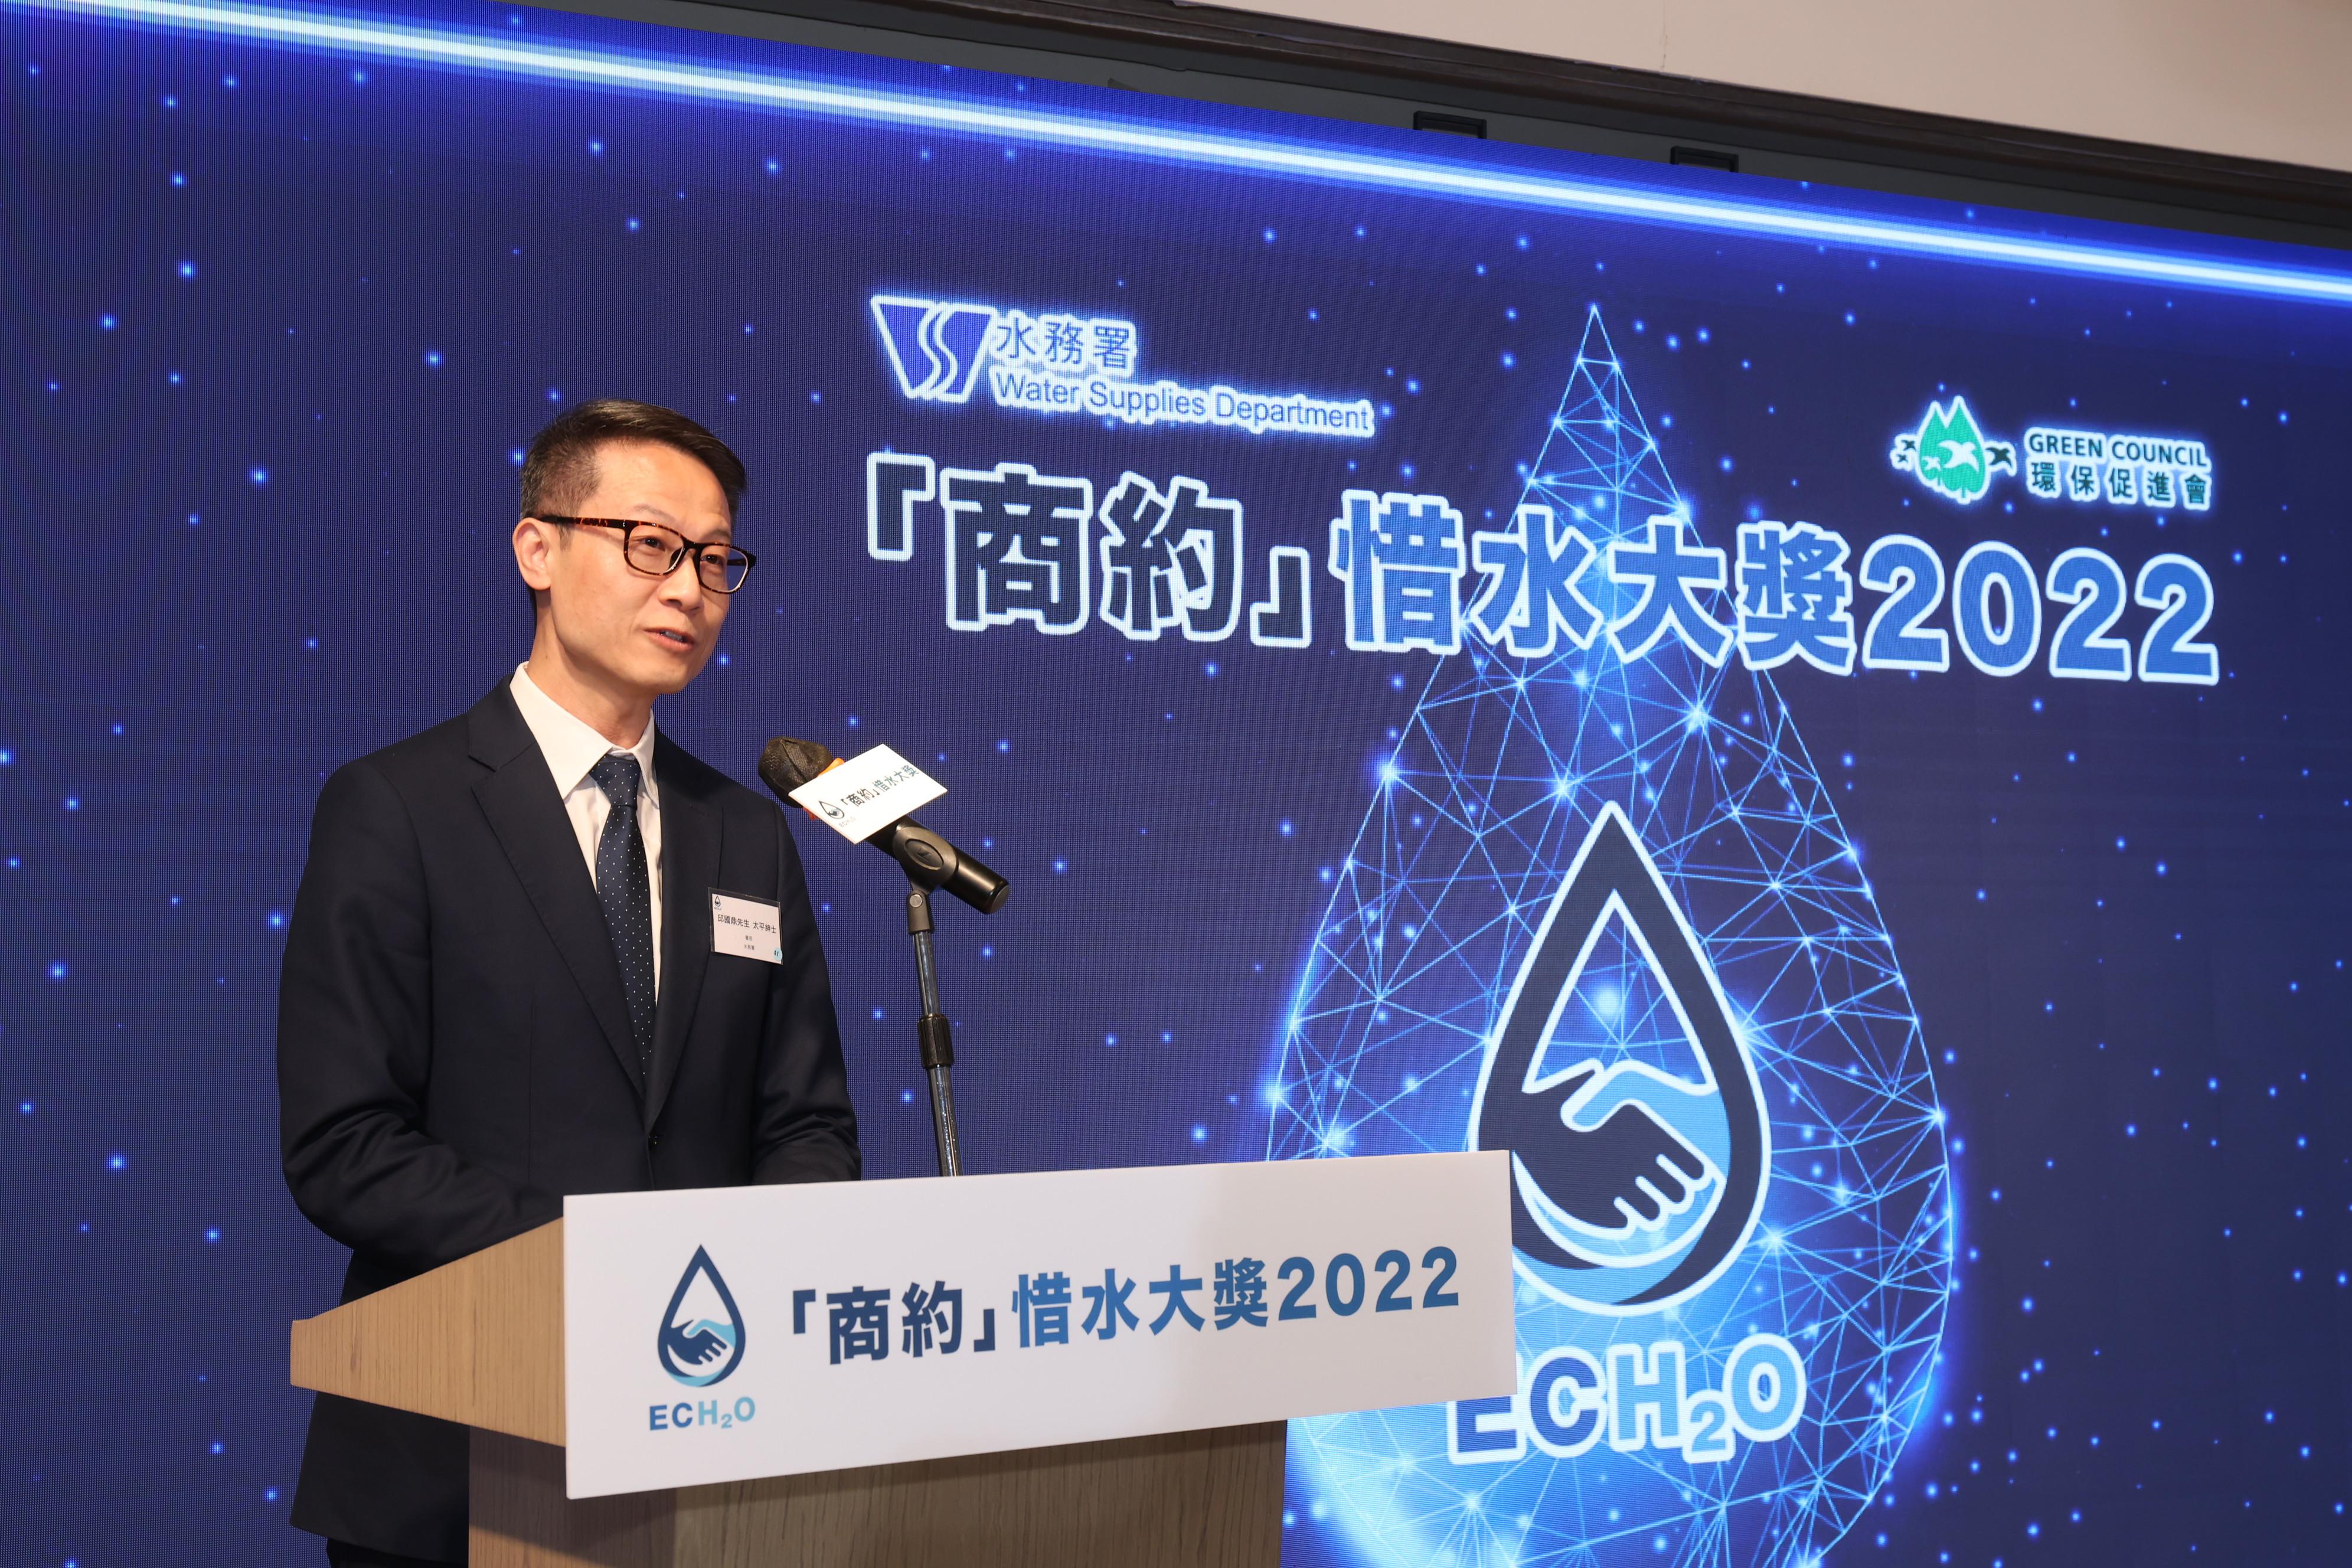 The Director of Water Supplies, Mr Tony Yau, said in his speech at the Enterprises Cherish Water Campaign Awards Ceremony today (March 22) that water consumption has increased by 70 million cubic metres in three years during the epidemic to over 1 000 million cubic metres by 2022, reaching 1 066 million cubic metres.